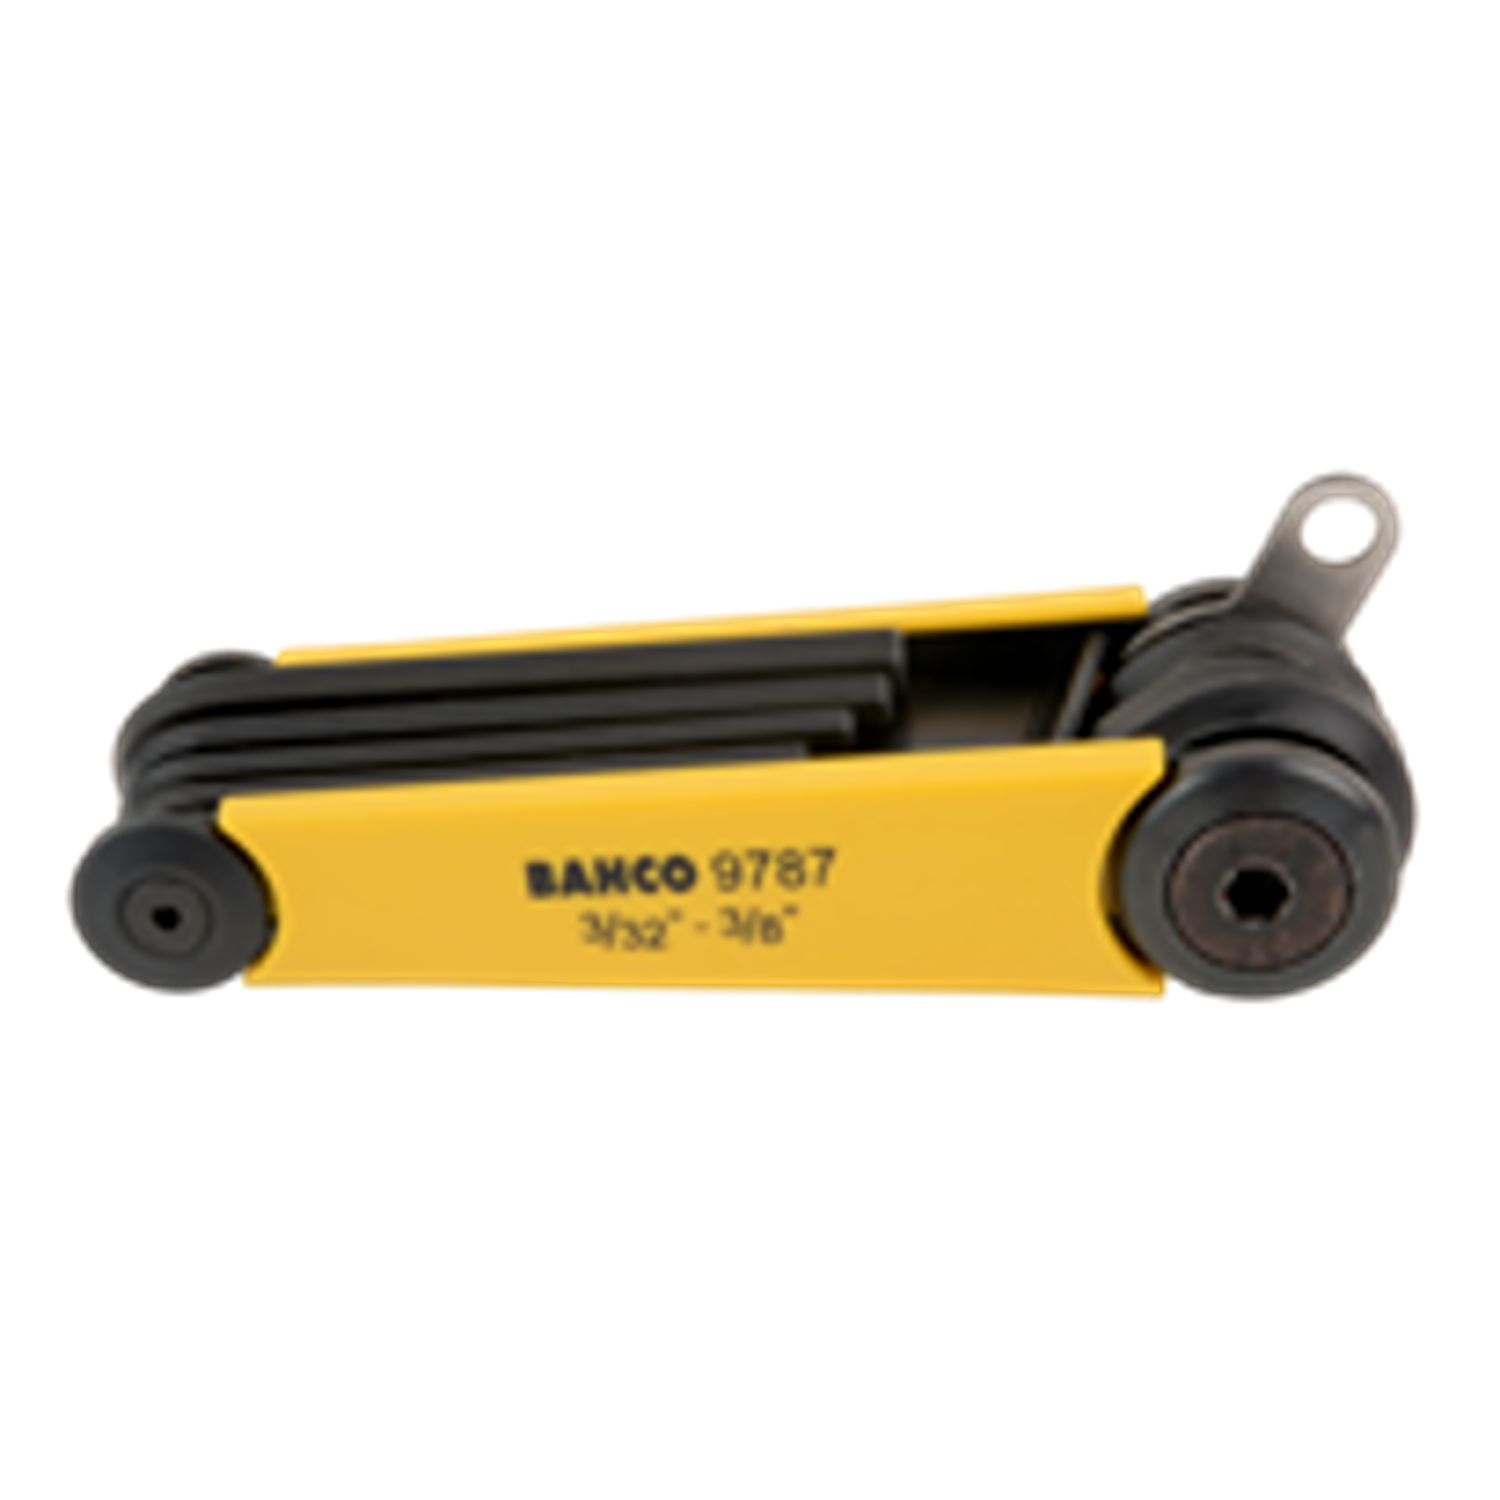 BAHCO TAHBE-9787 Imperial Offset Screwdriver Hex Key Folder- 7pcs - Premium Hex Key Folder from BAHCO - Shop now at Yew Aik.